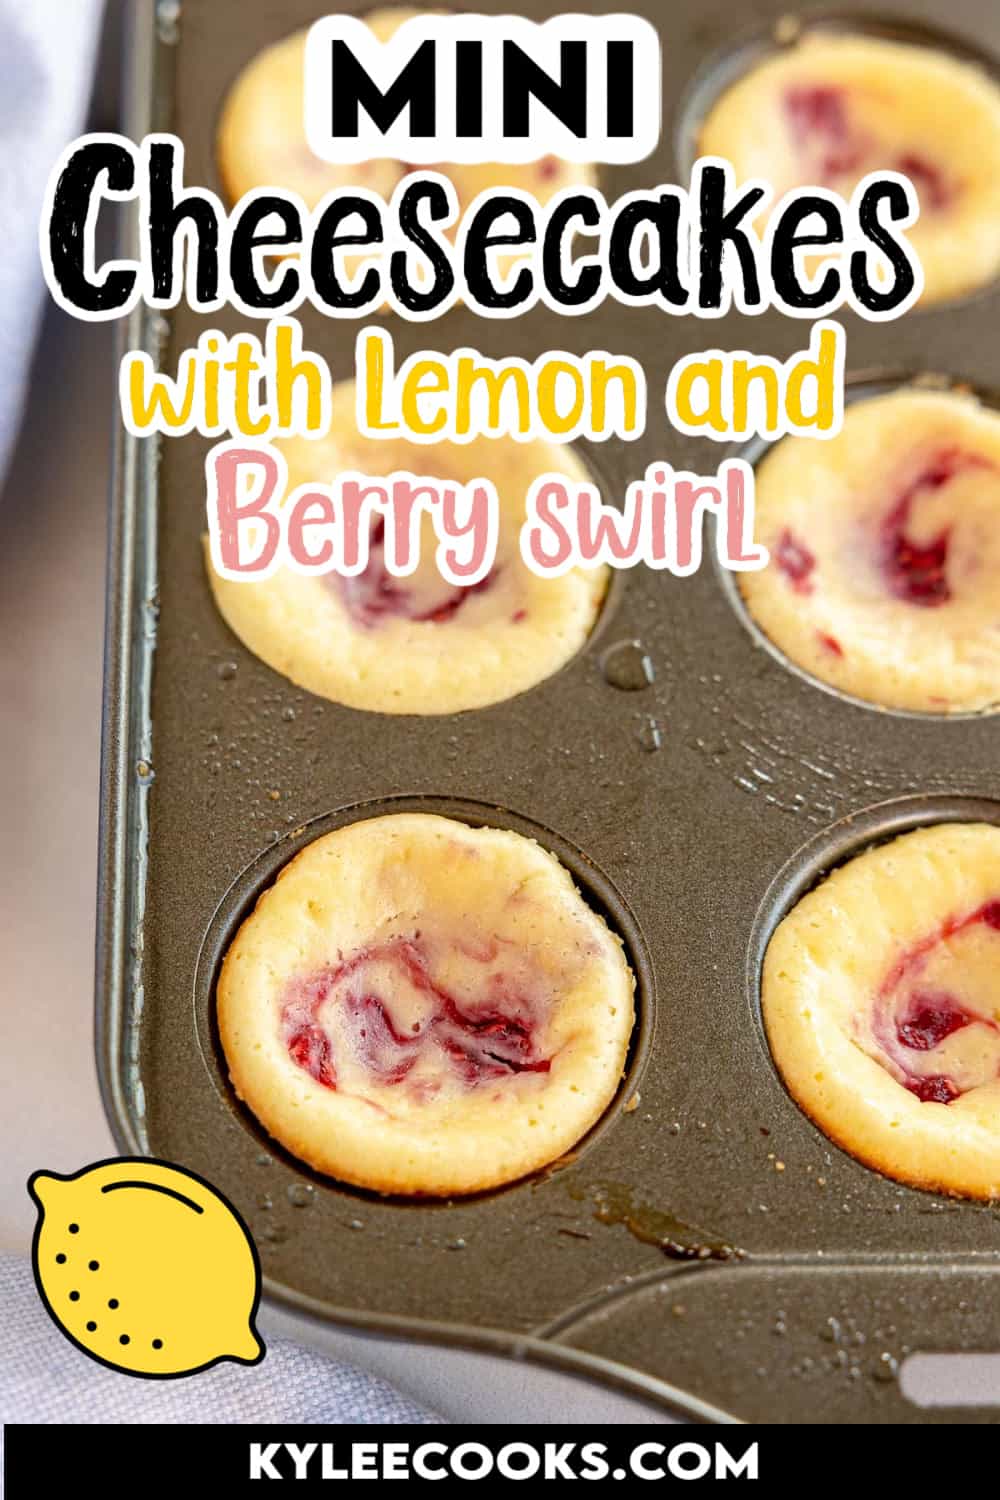 Mini cheesecakes in a baking pan with recipe name and ingredients overlaid in text.